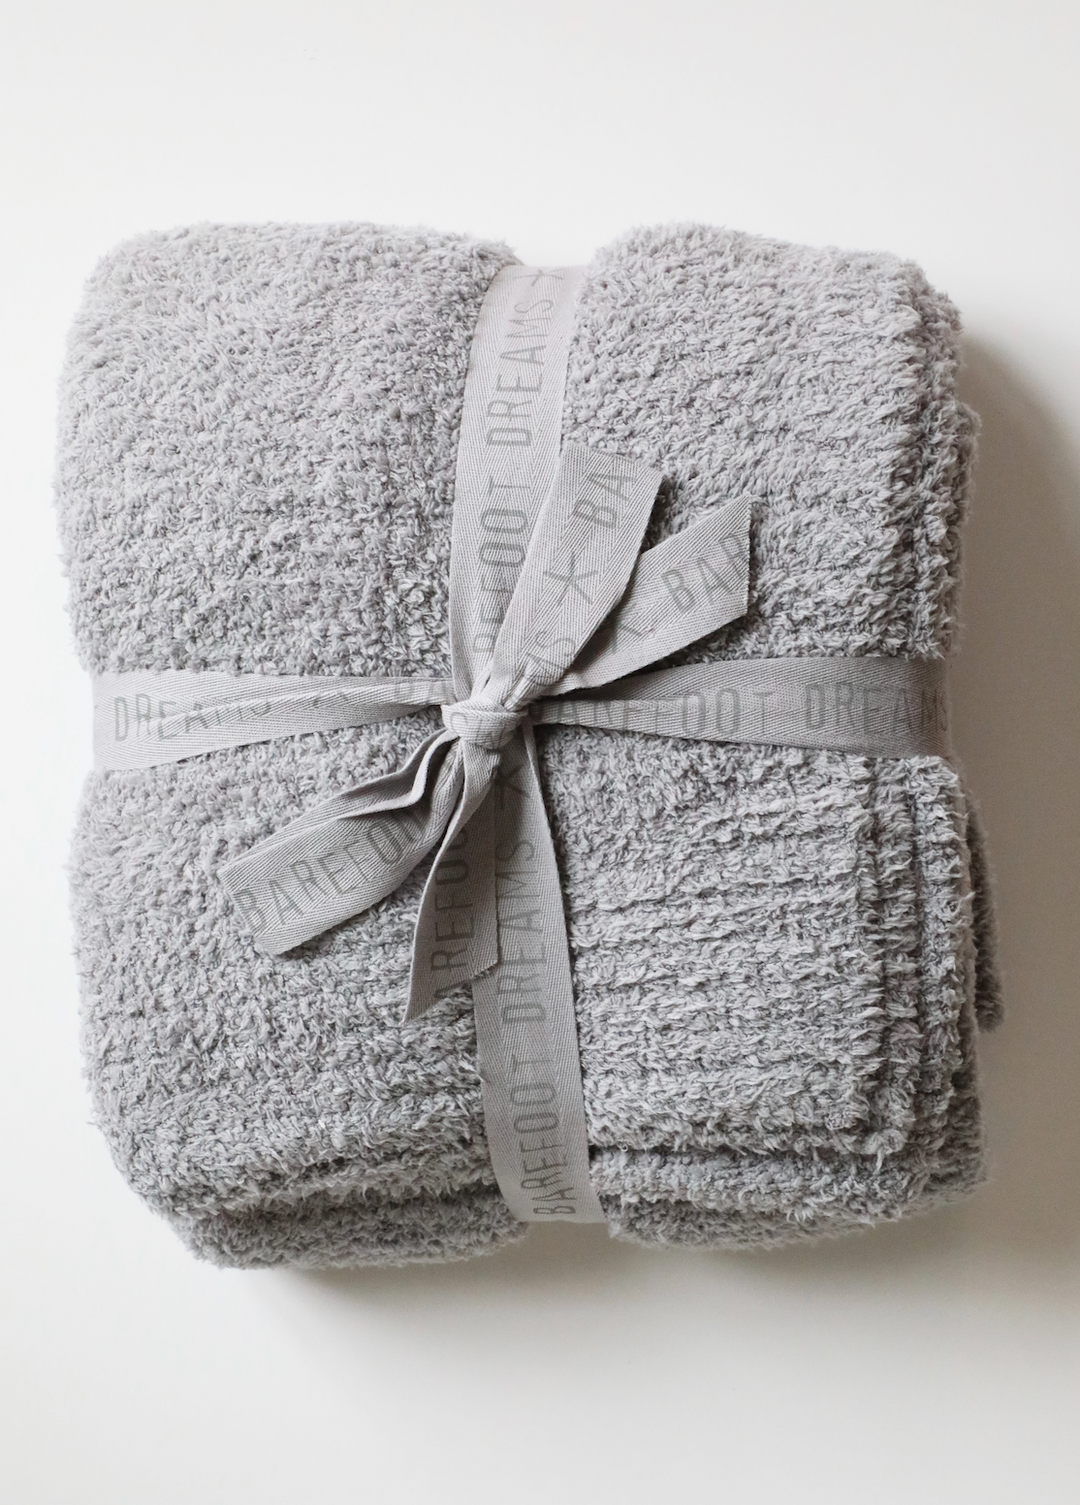 Barefoot Dreams - Cozychic Throw in Dove Gray